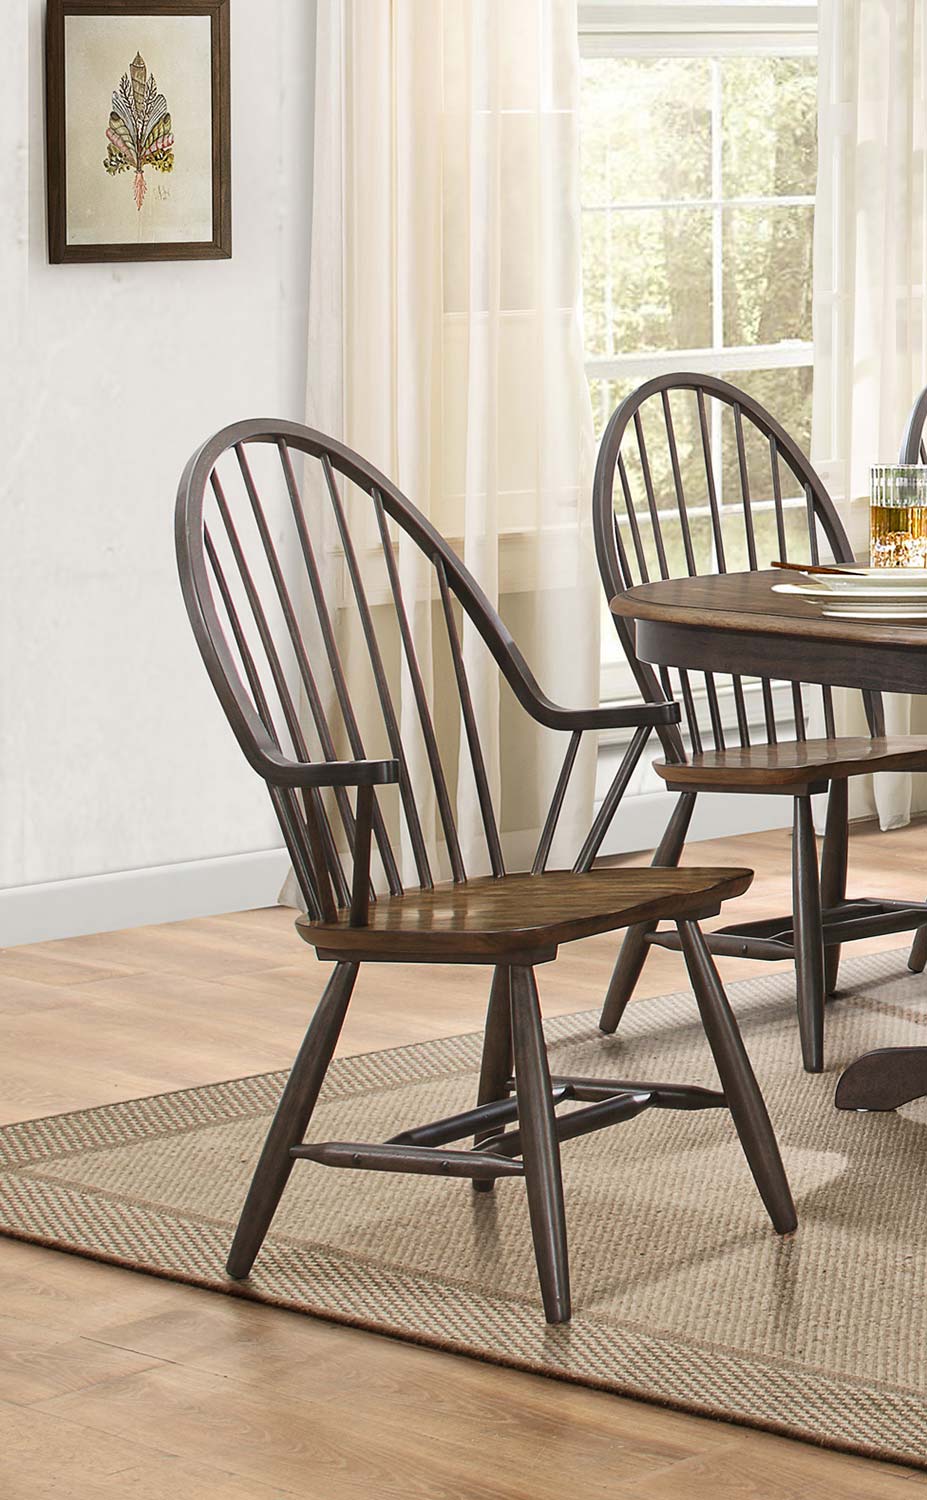 Homelegance Cline Windsor Chair with Arms - Two tone finish